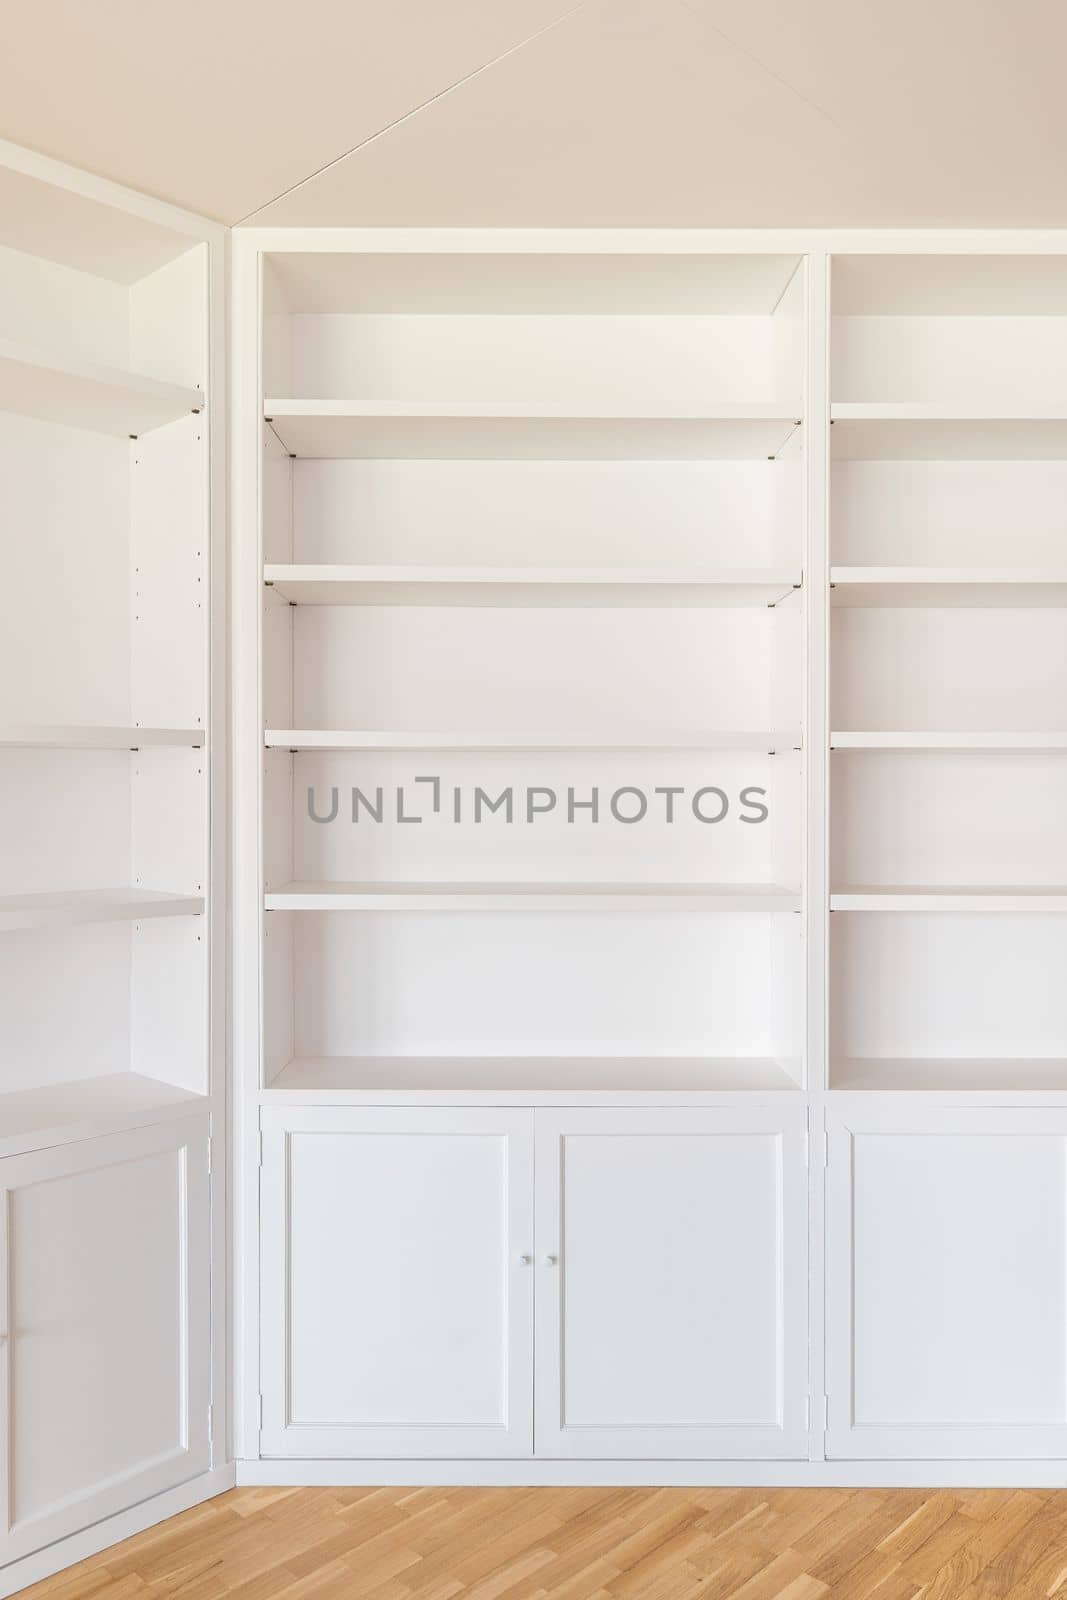 White wardrobes from floor to ceiling along the walls in the room. Many shelves for various interior items, books. From below lockers with doors for clothes, bed linen. The floor is wooden parquet. by apavlin